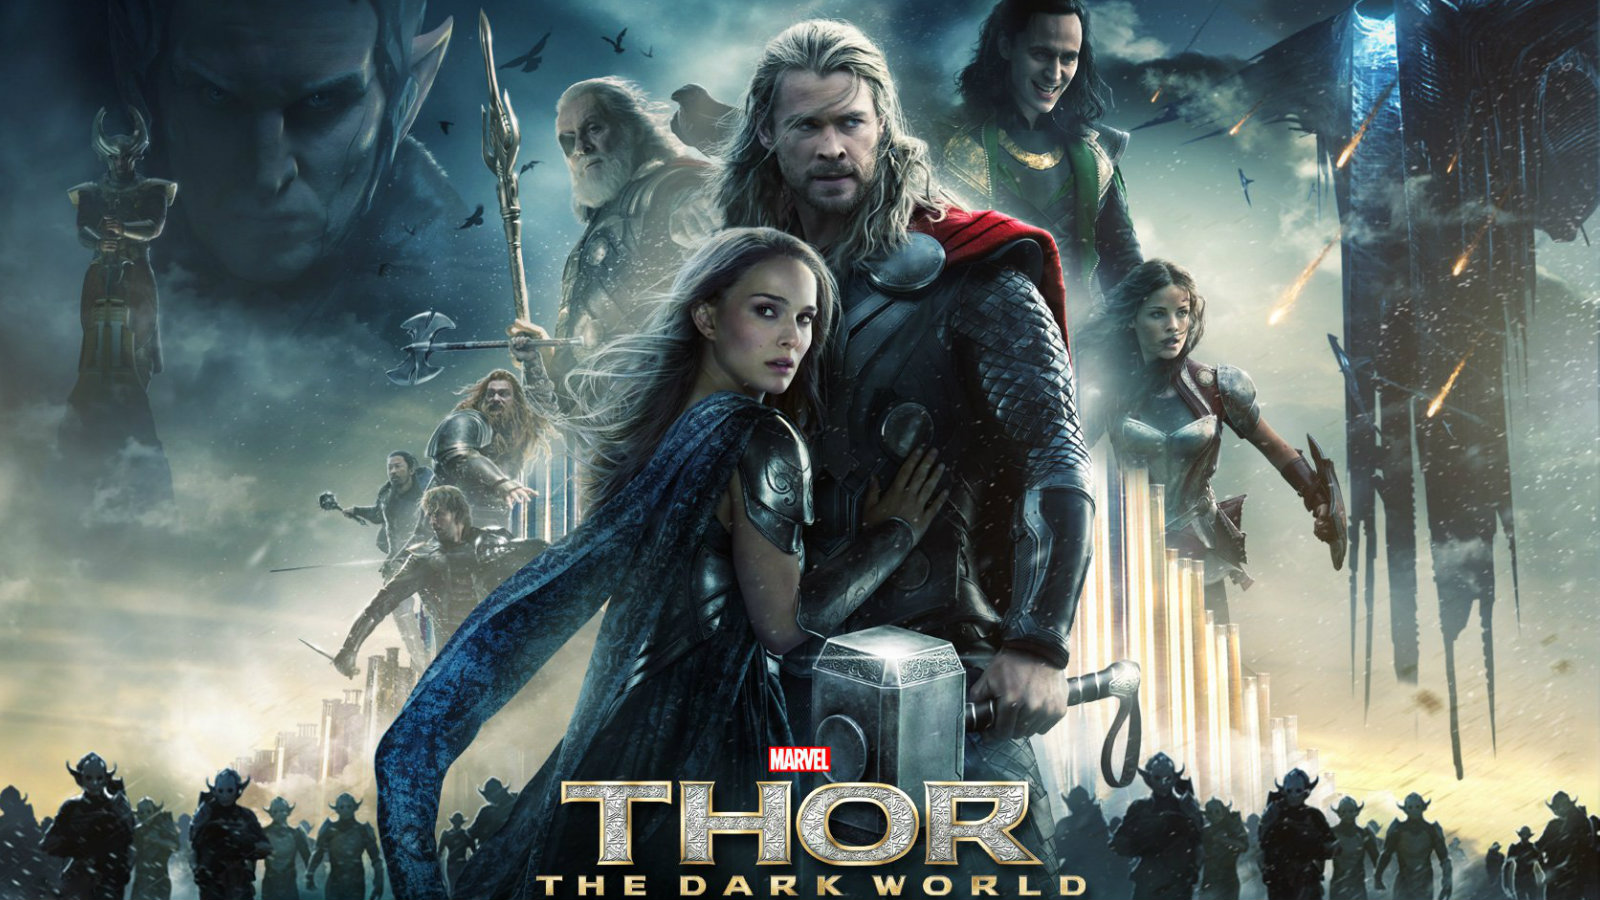 Thor The Dark World Image HD Wallpaper And